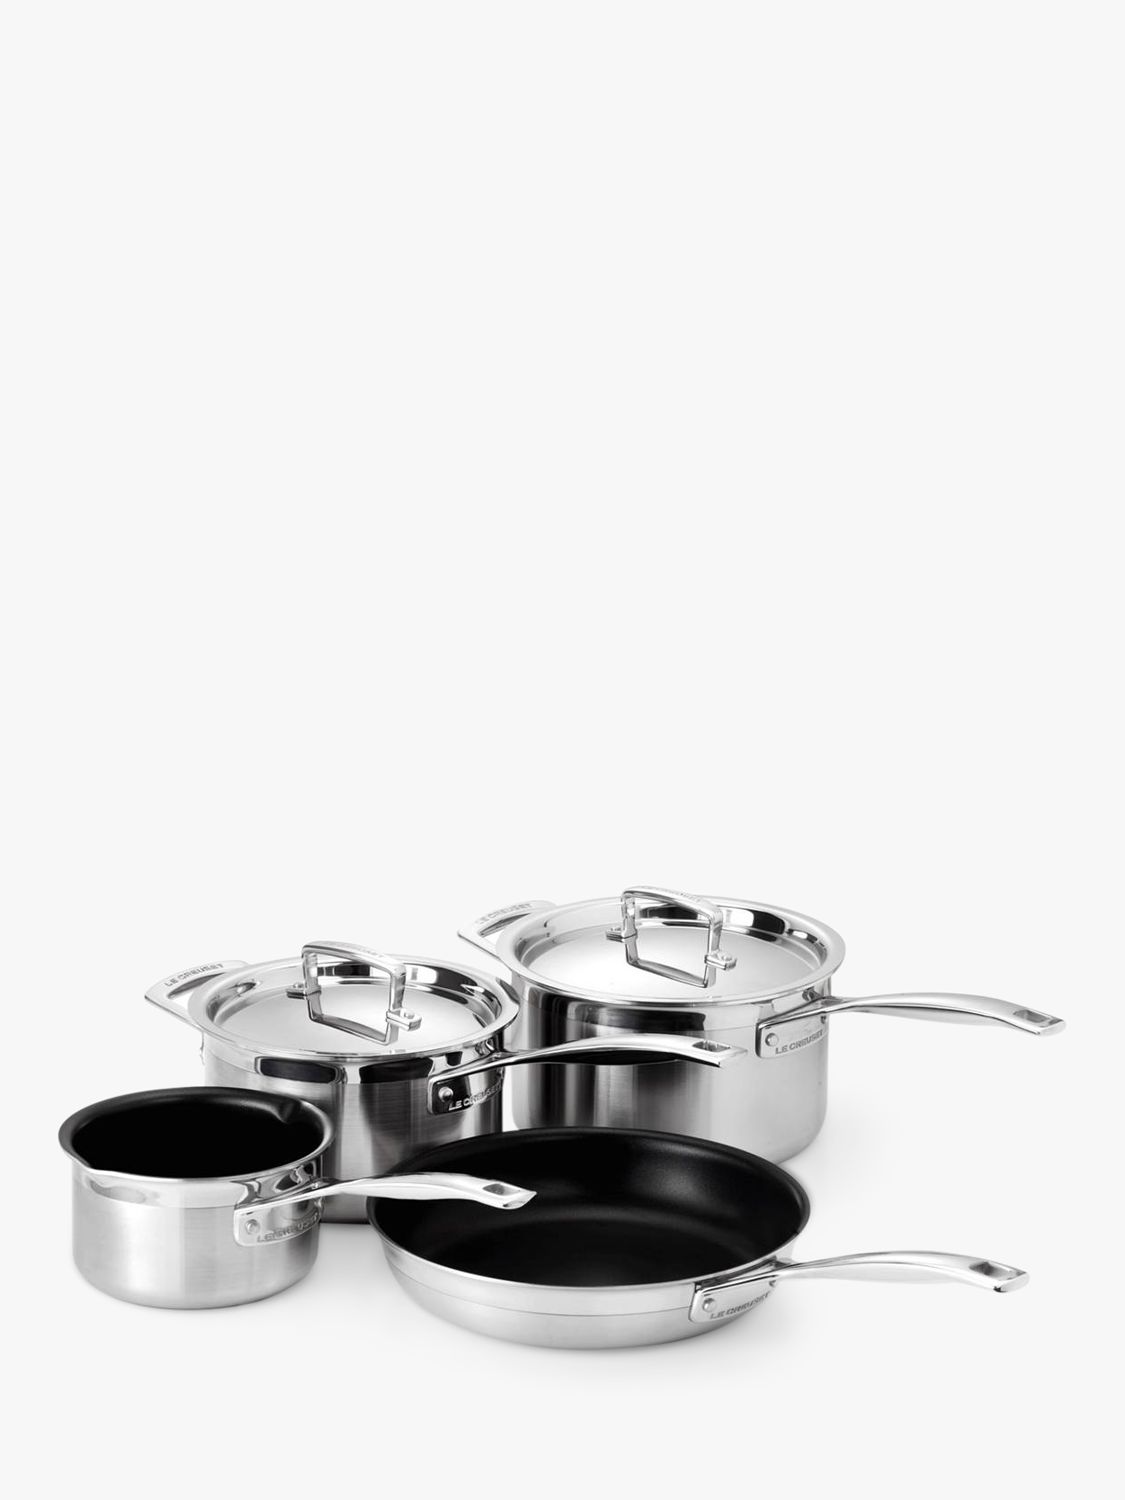 Le Creuset 3Ply Stainless Steel Saucepans and Frying Pan Set, 4 Pieces